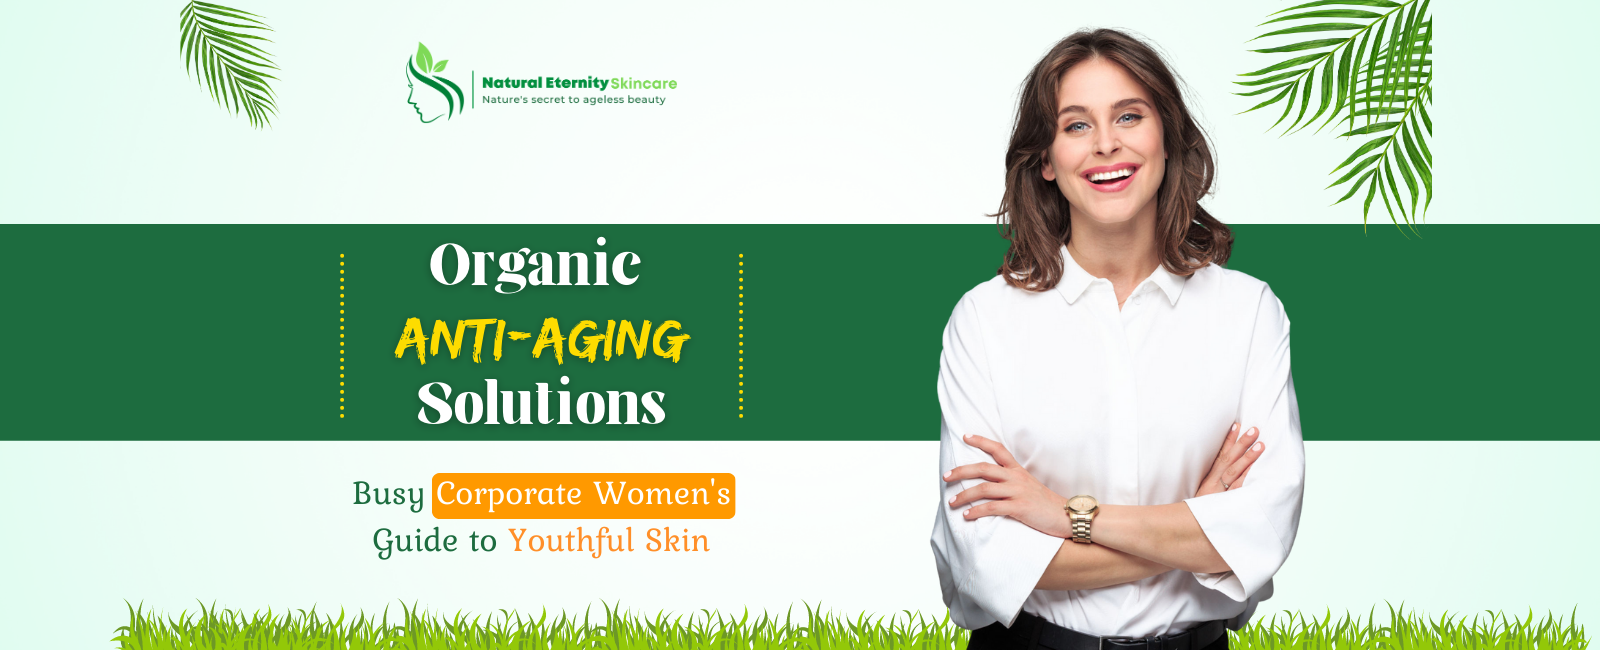 Organic Anti-Aging Solutions for Busy Corporate Women